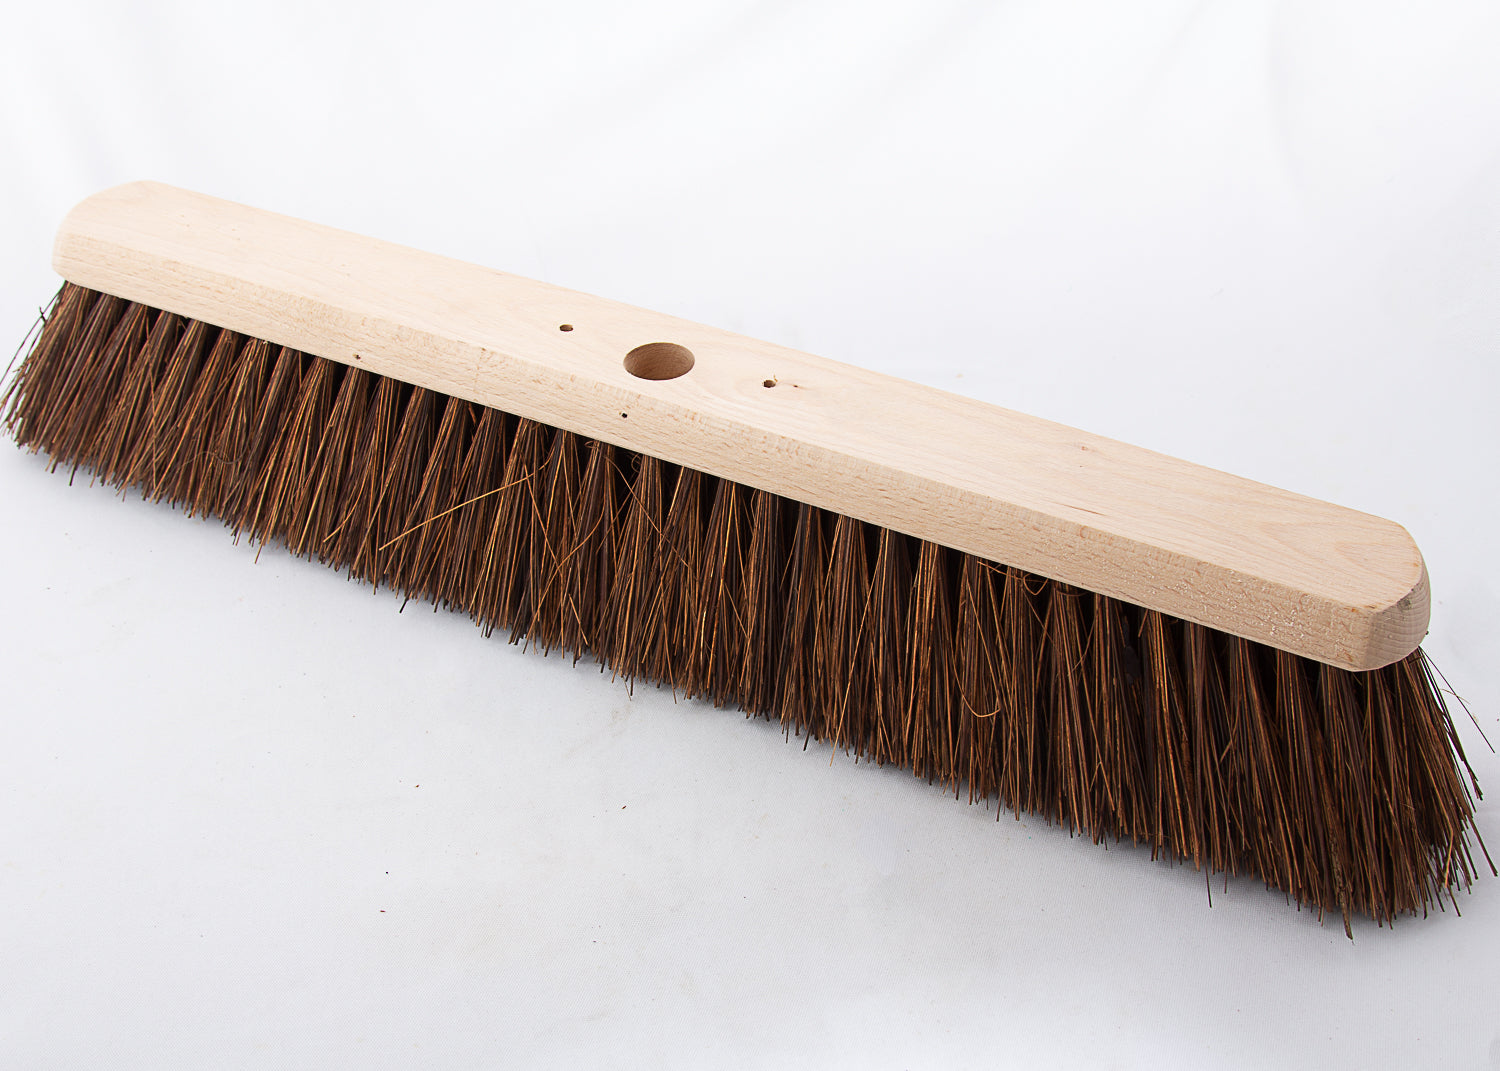 photo showing the wide platform broom head with natural bristle